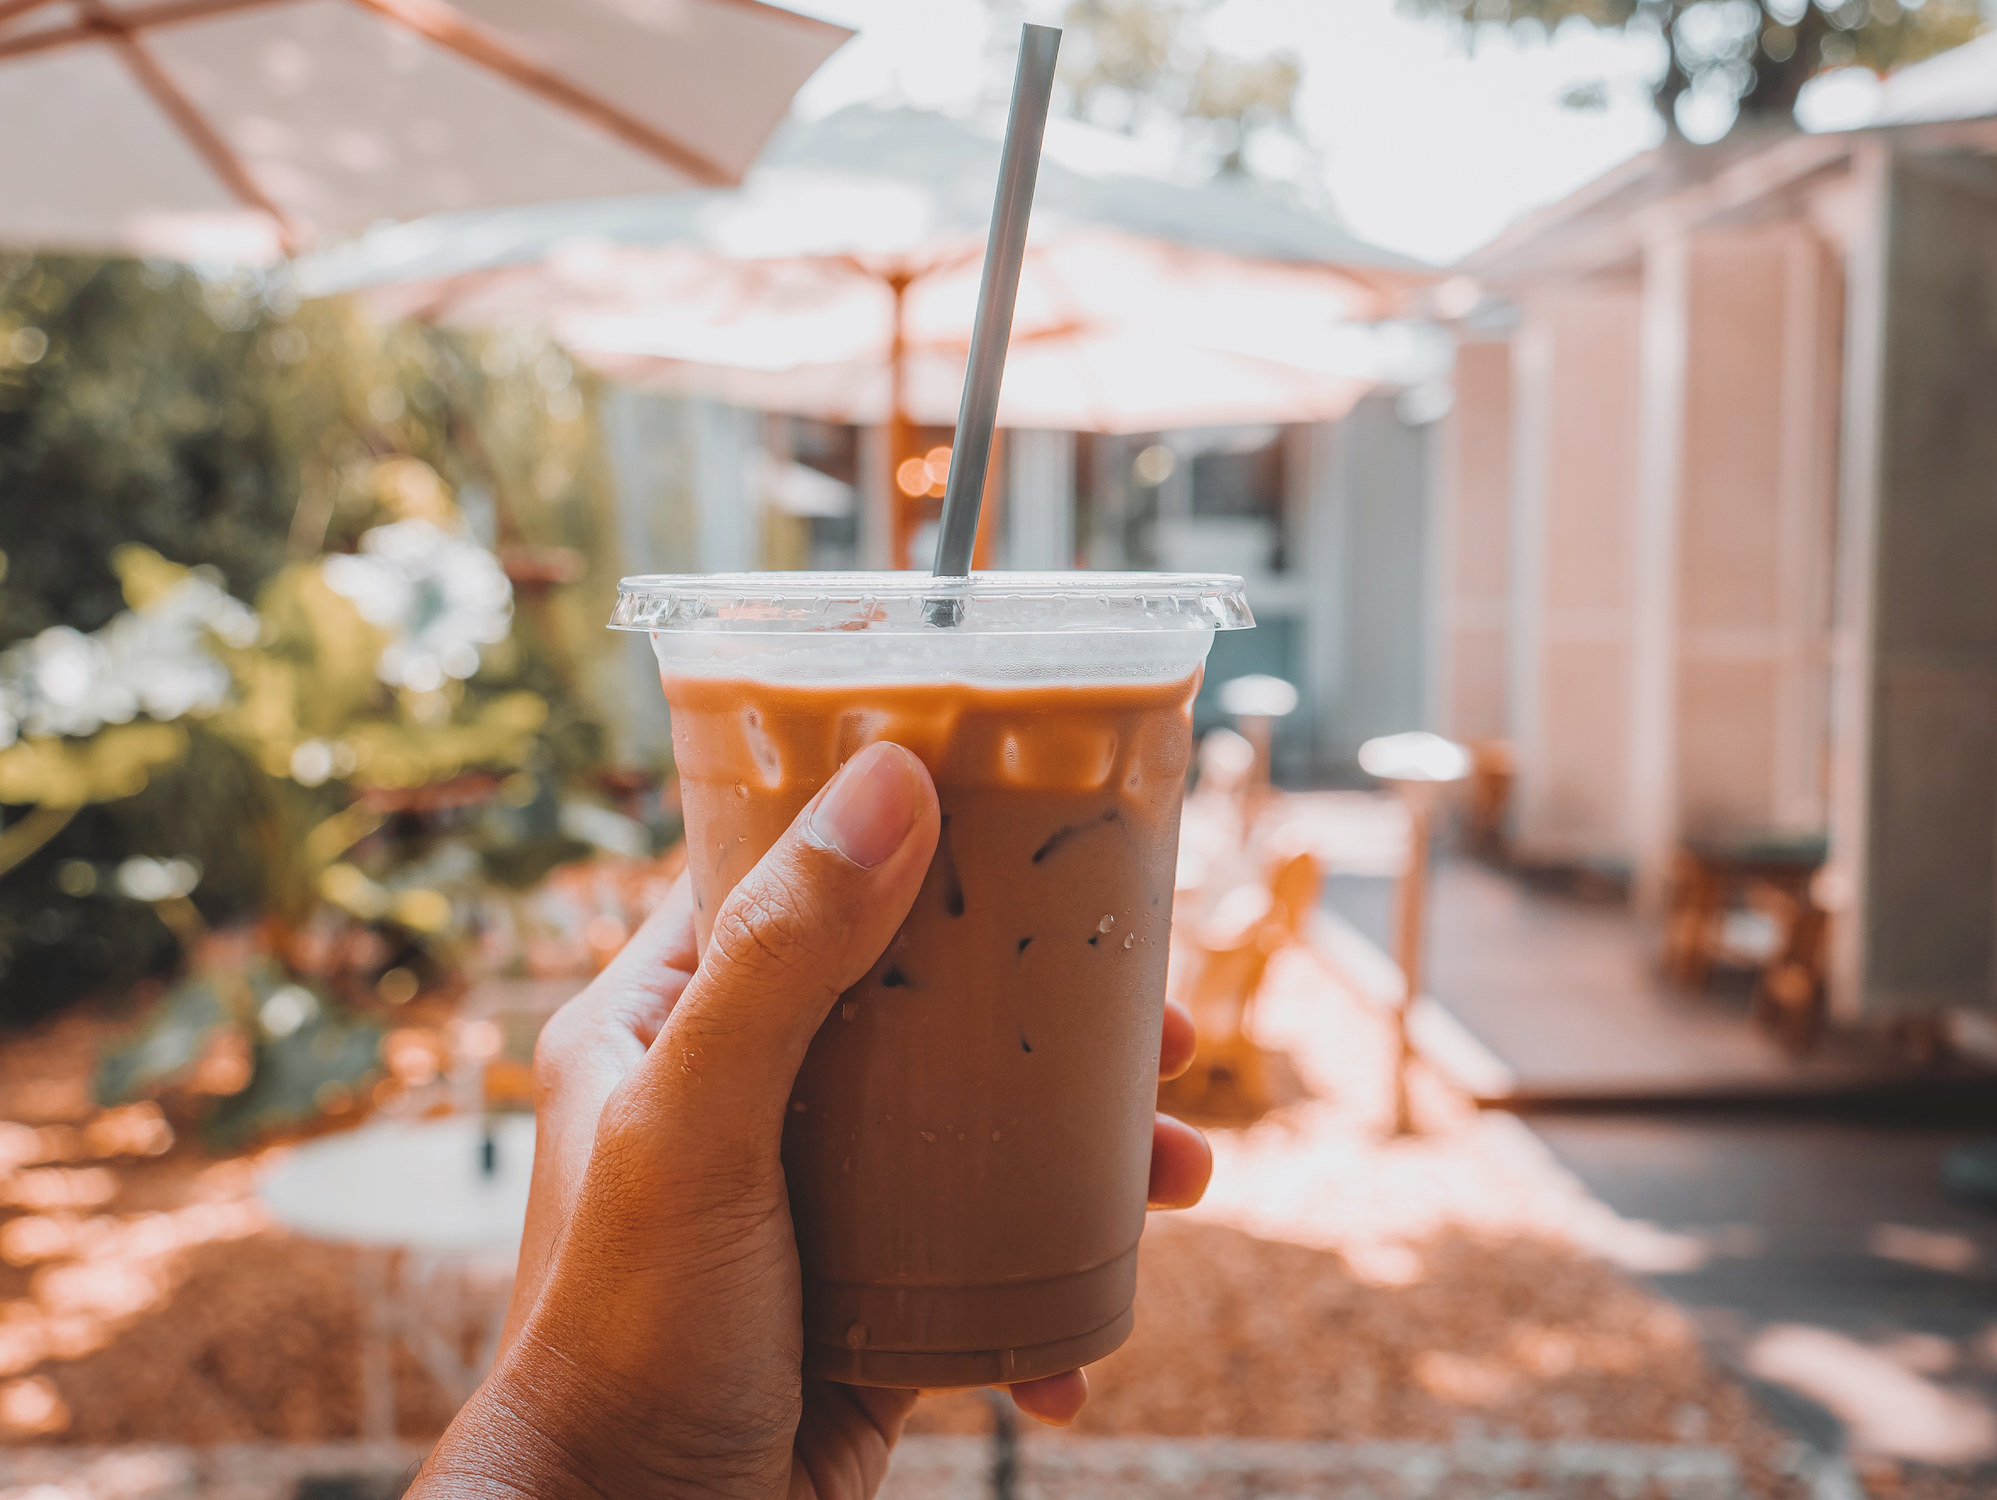 A hand holds a small plastic cup of iced coffee